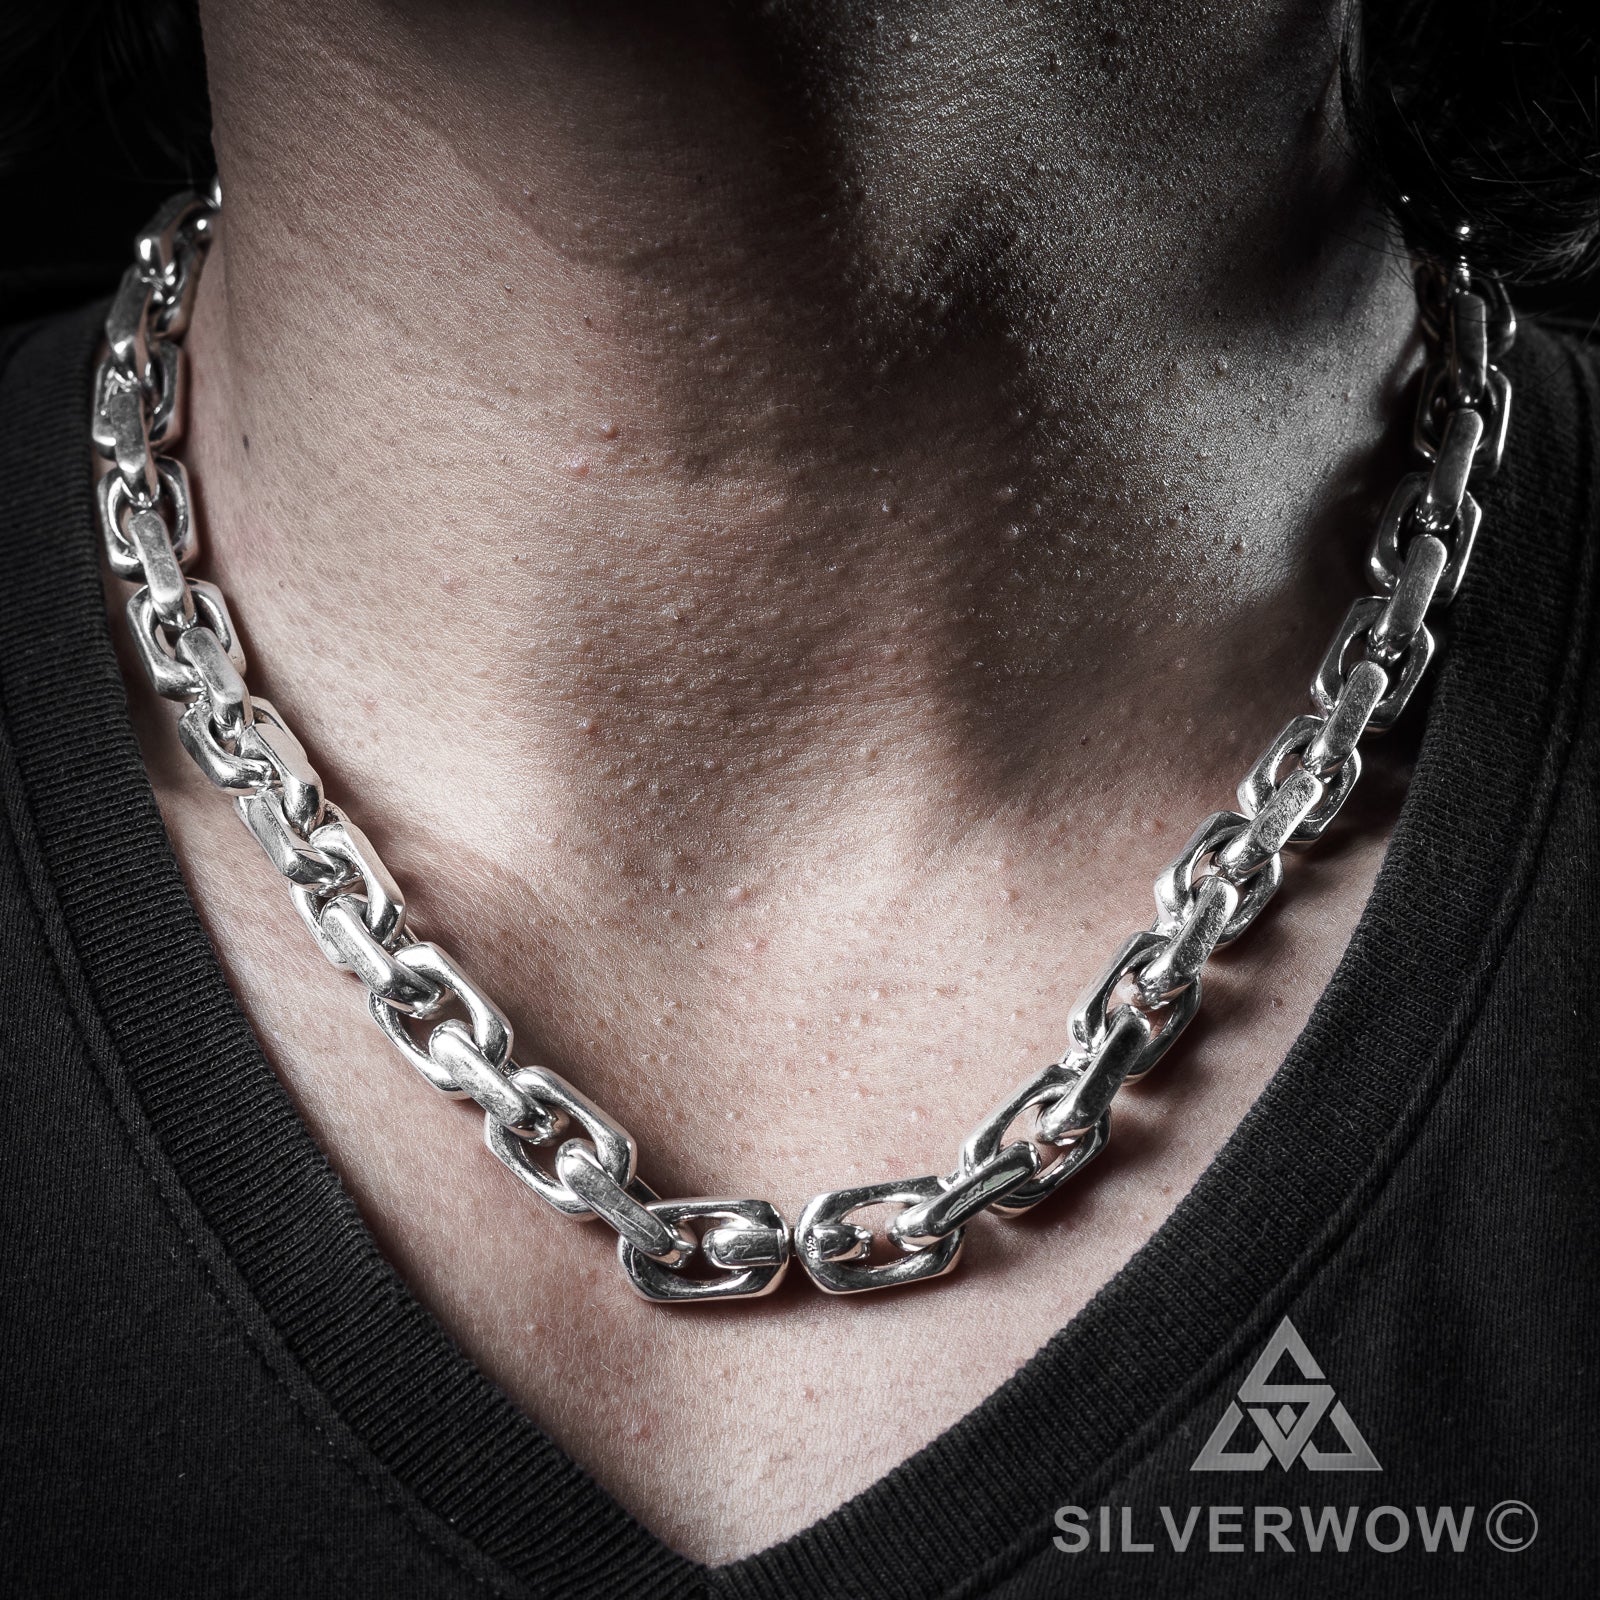 10mm Mens Chain Link Silver Necklace